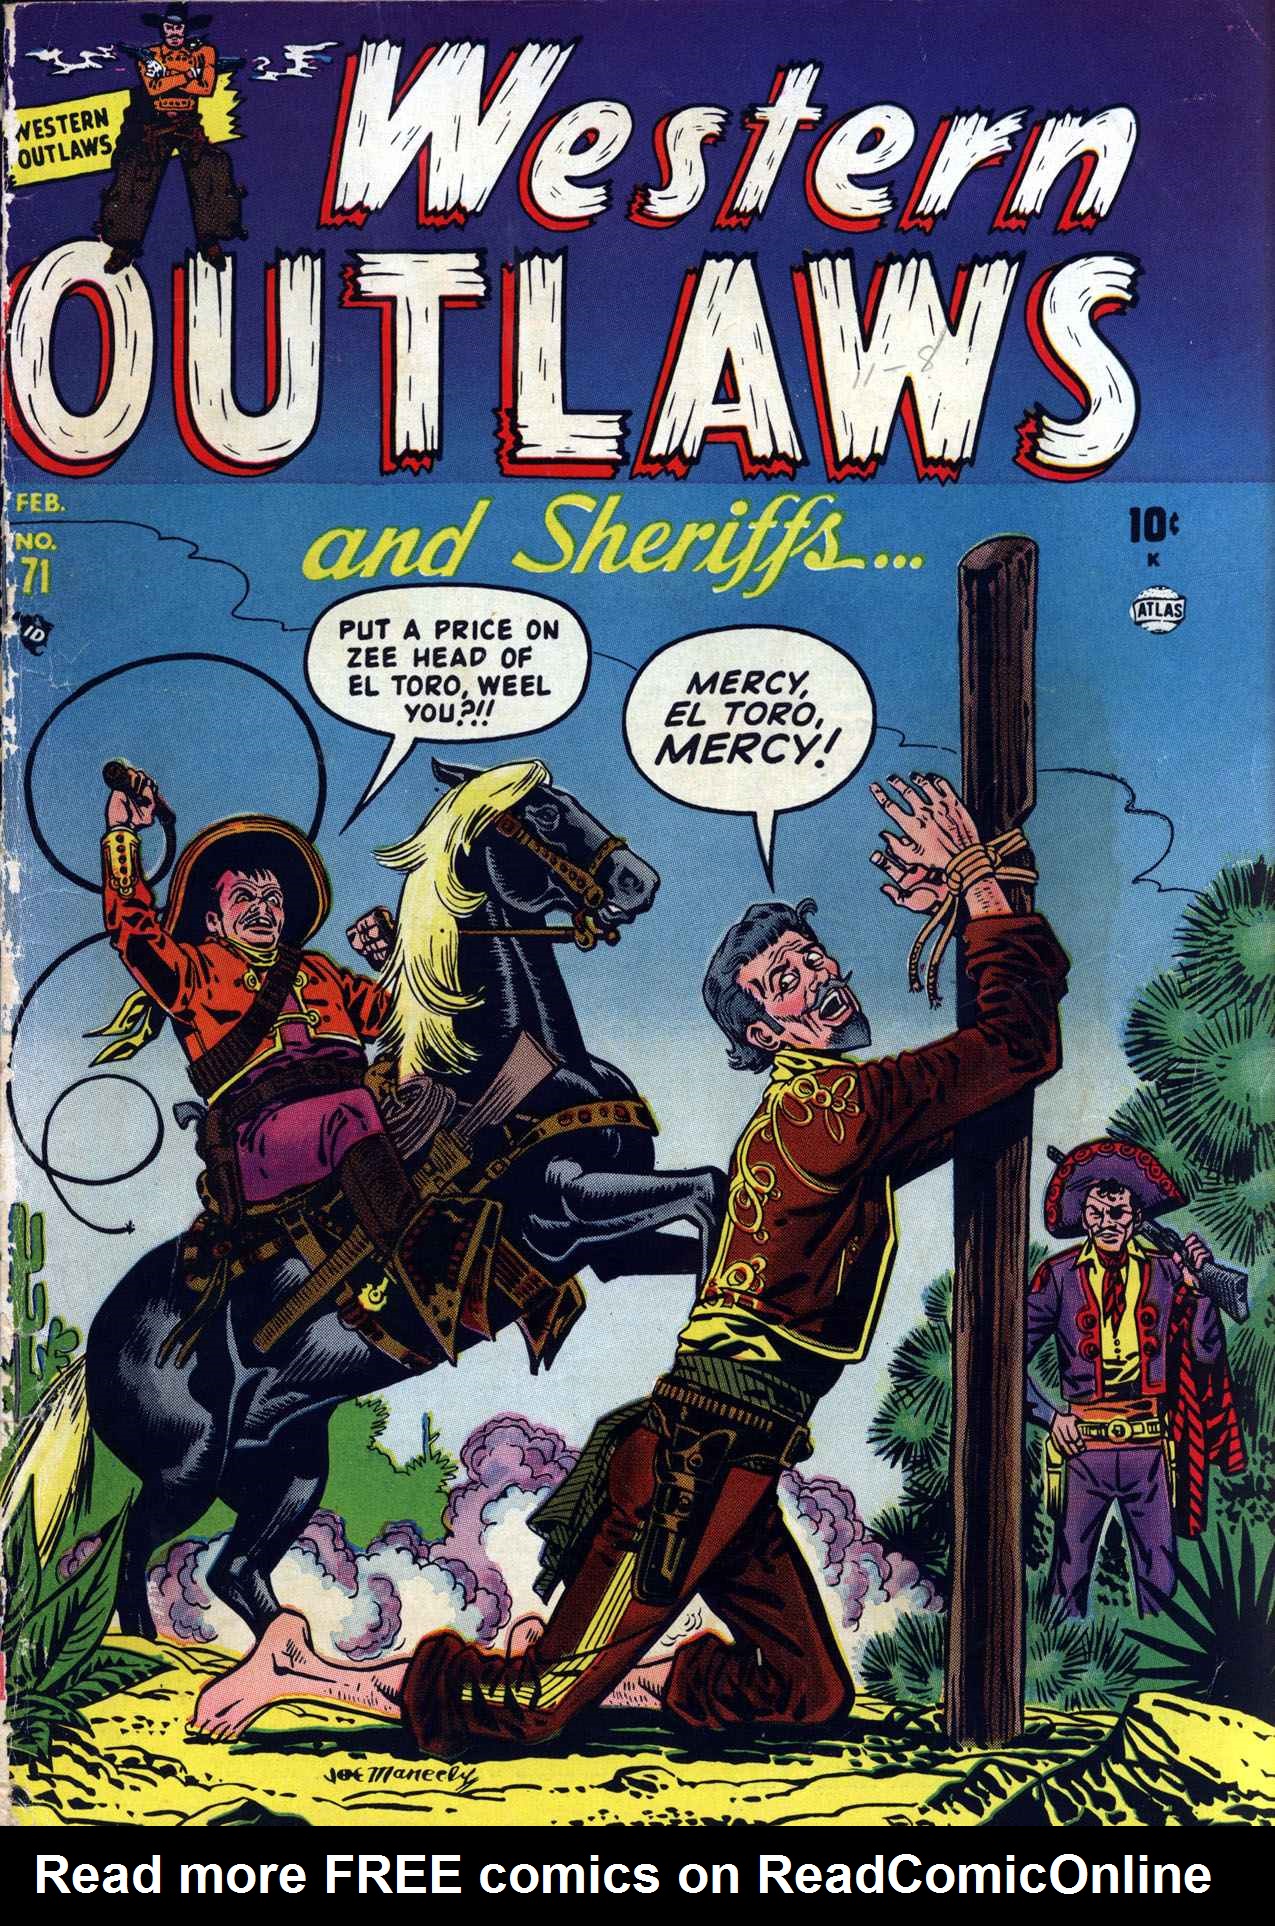 Read online Western Outlaws and Sheriffs comic -  Issue #71 - 1